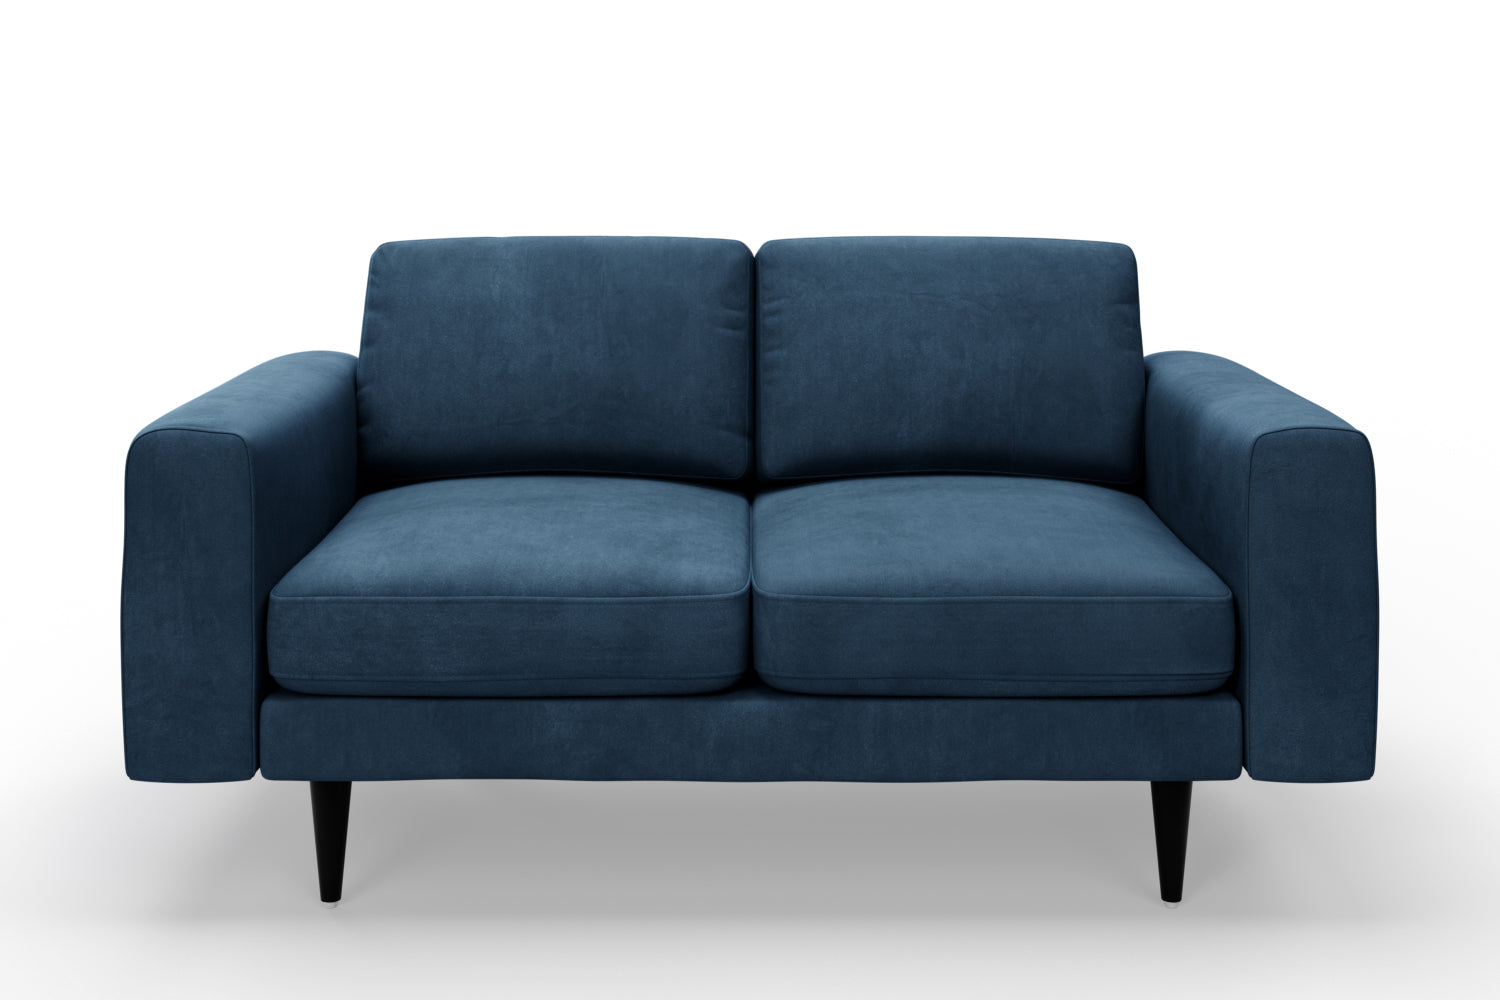 SNUG | The Big Chill 2 Seater Sofa in Blue Steel variant_40414876762160